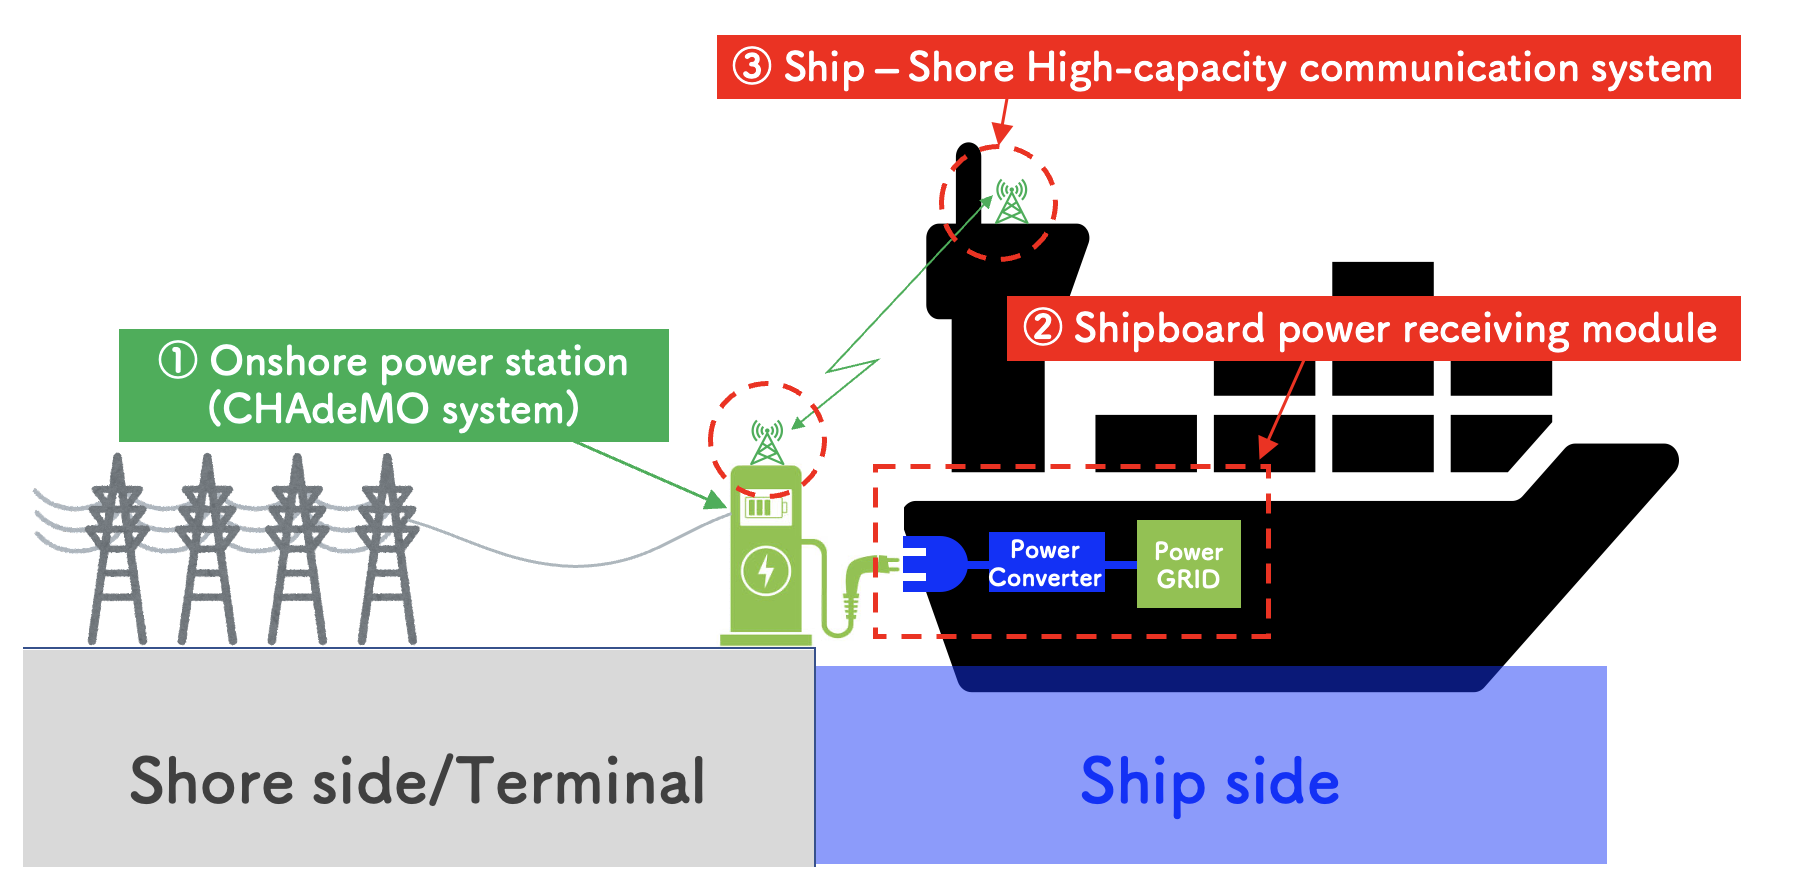 Japan to install zero emission chargers for ships in Hanshin Port and Keihin Port by 2025